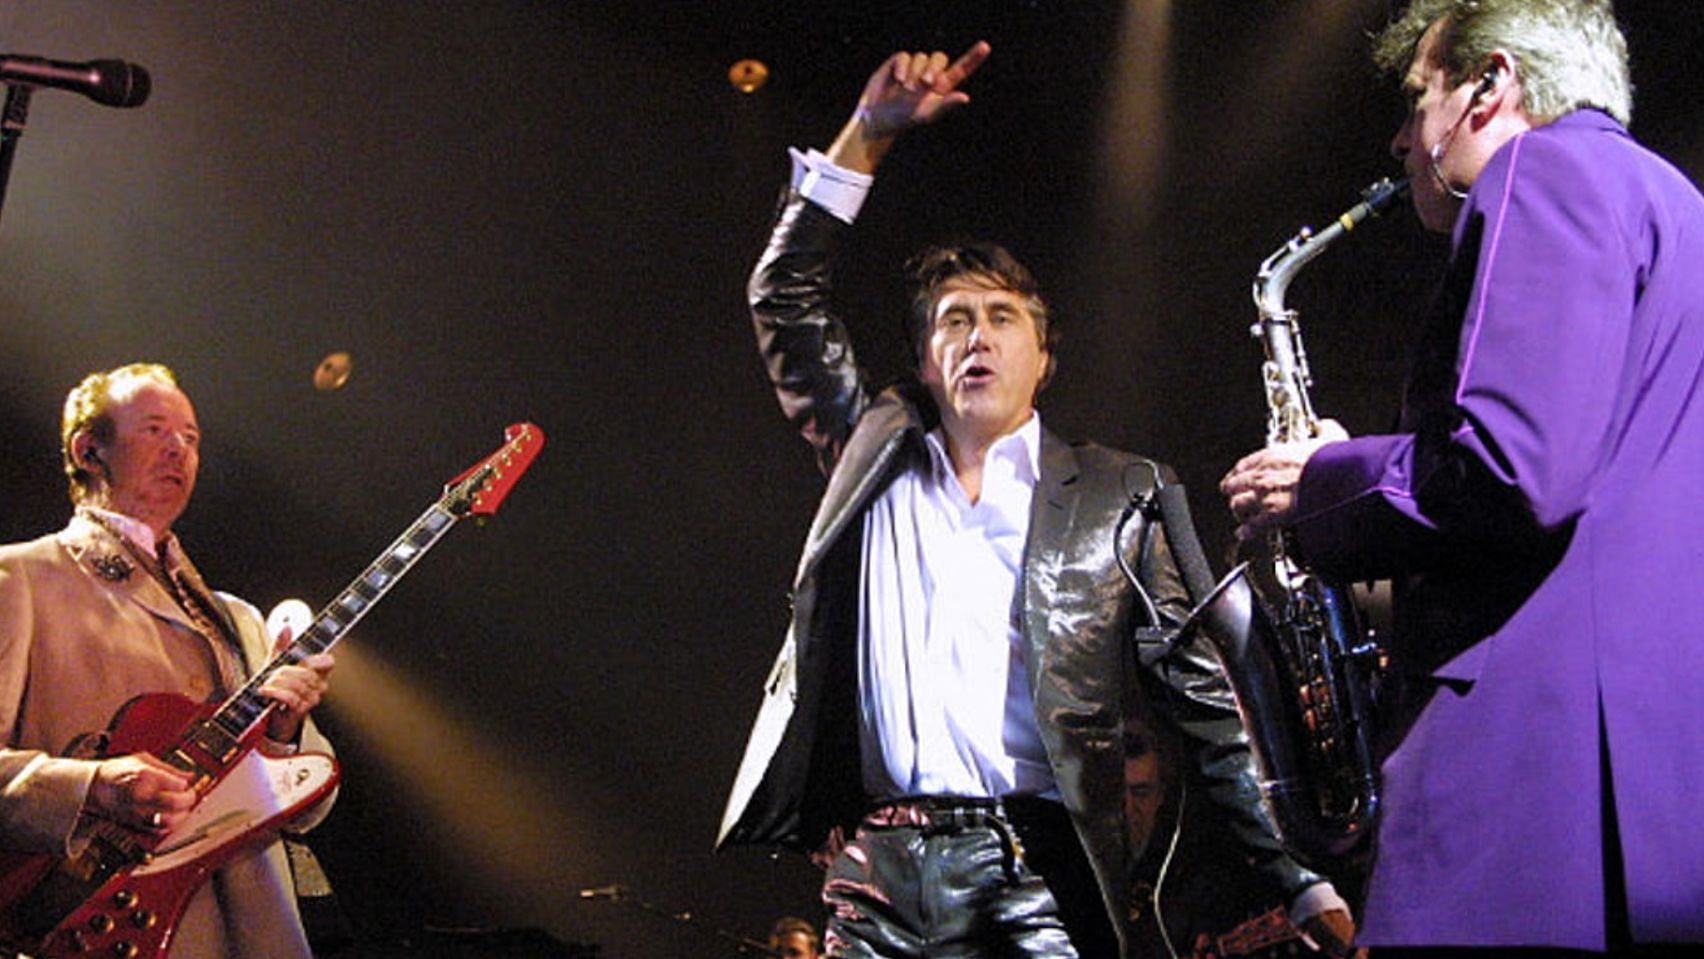 Popular English rock band from the &lsquo;70s, Roxy Music, is returning on tour for the first time in 11 years. (Image via (Scott Gries /Getty Images))